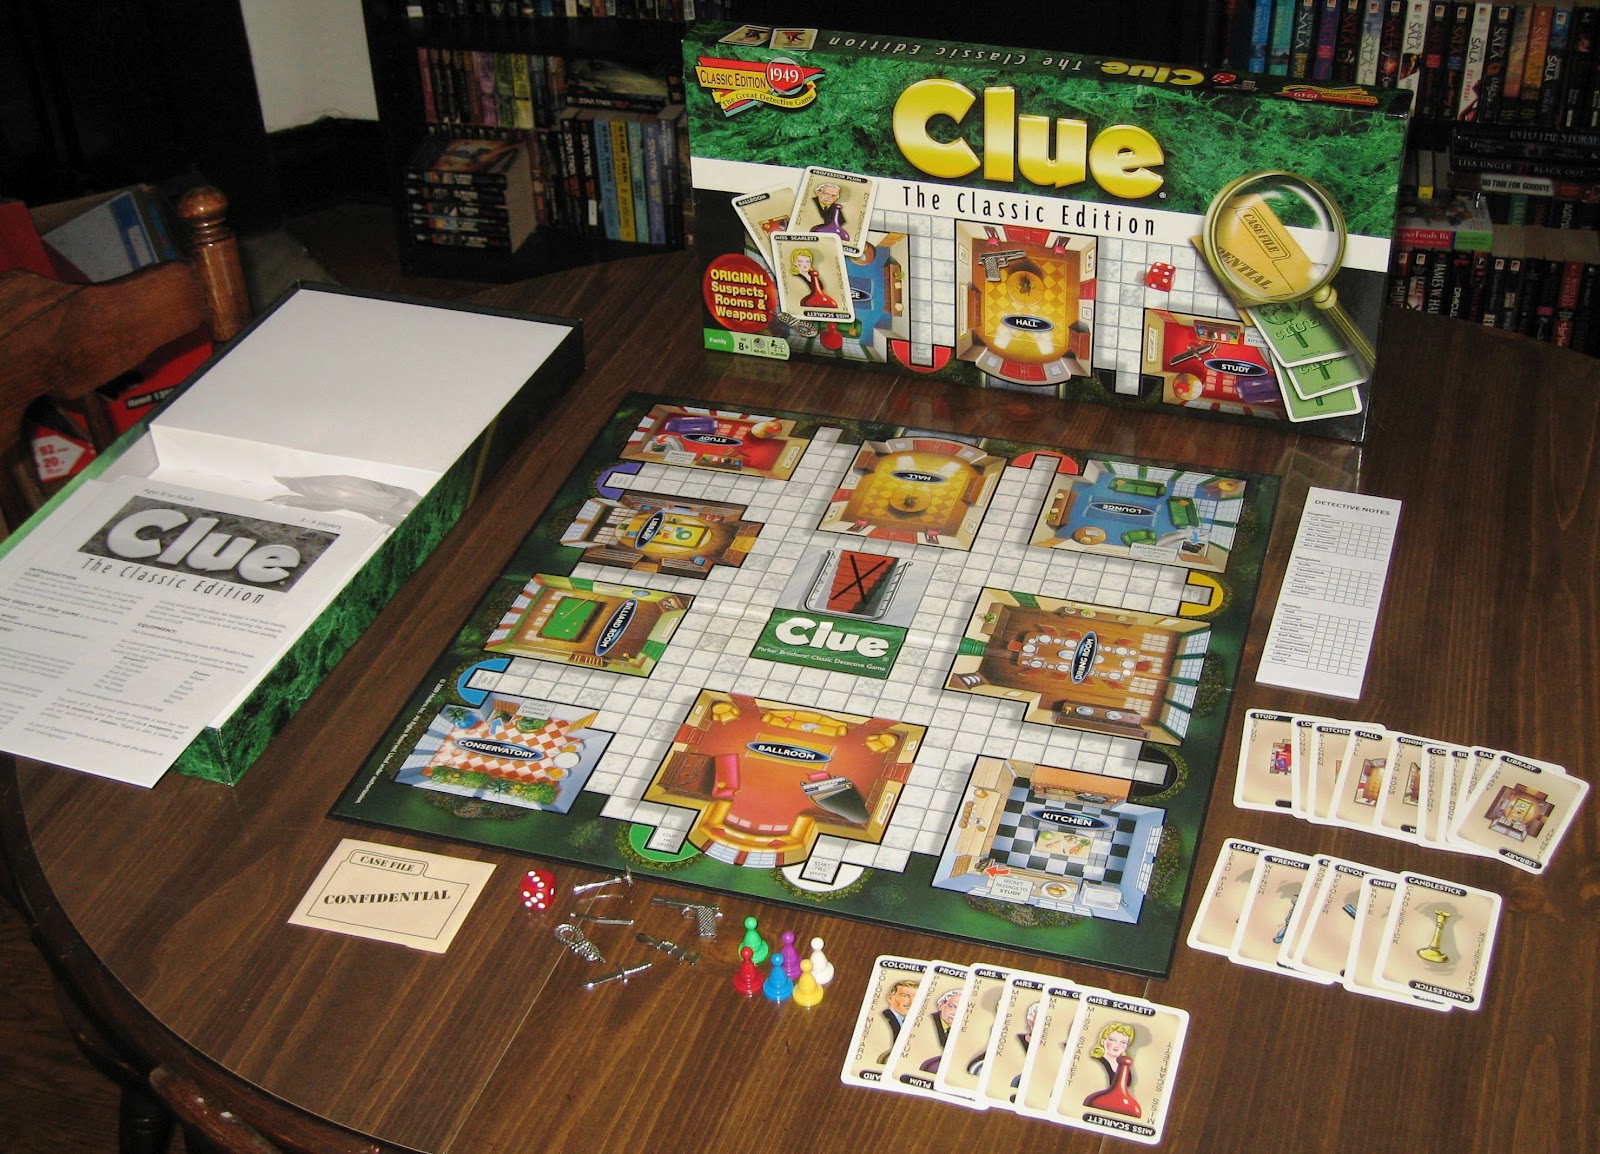 clue-the-classic-edition-dad-s-gaming-addiction